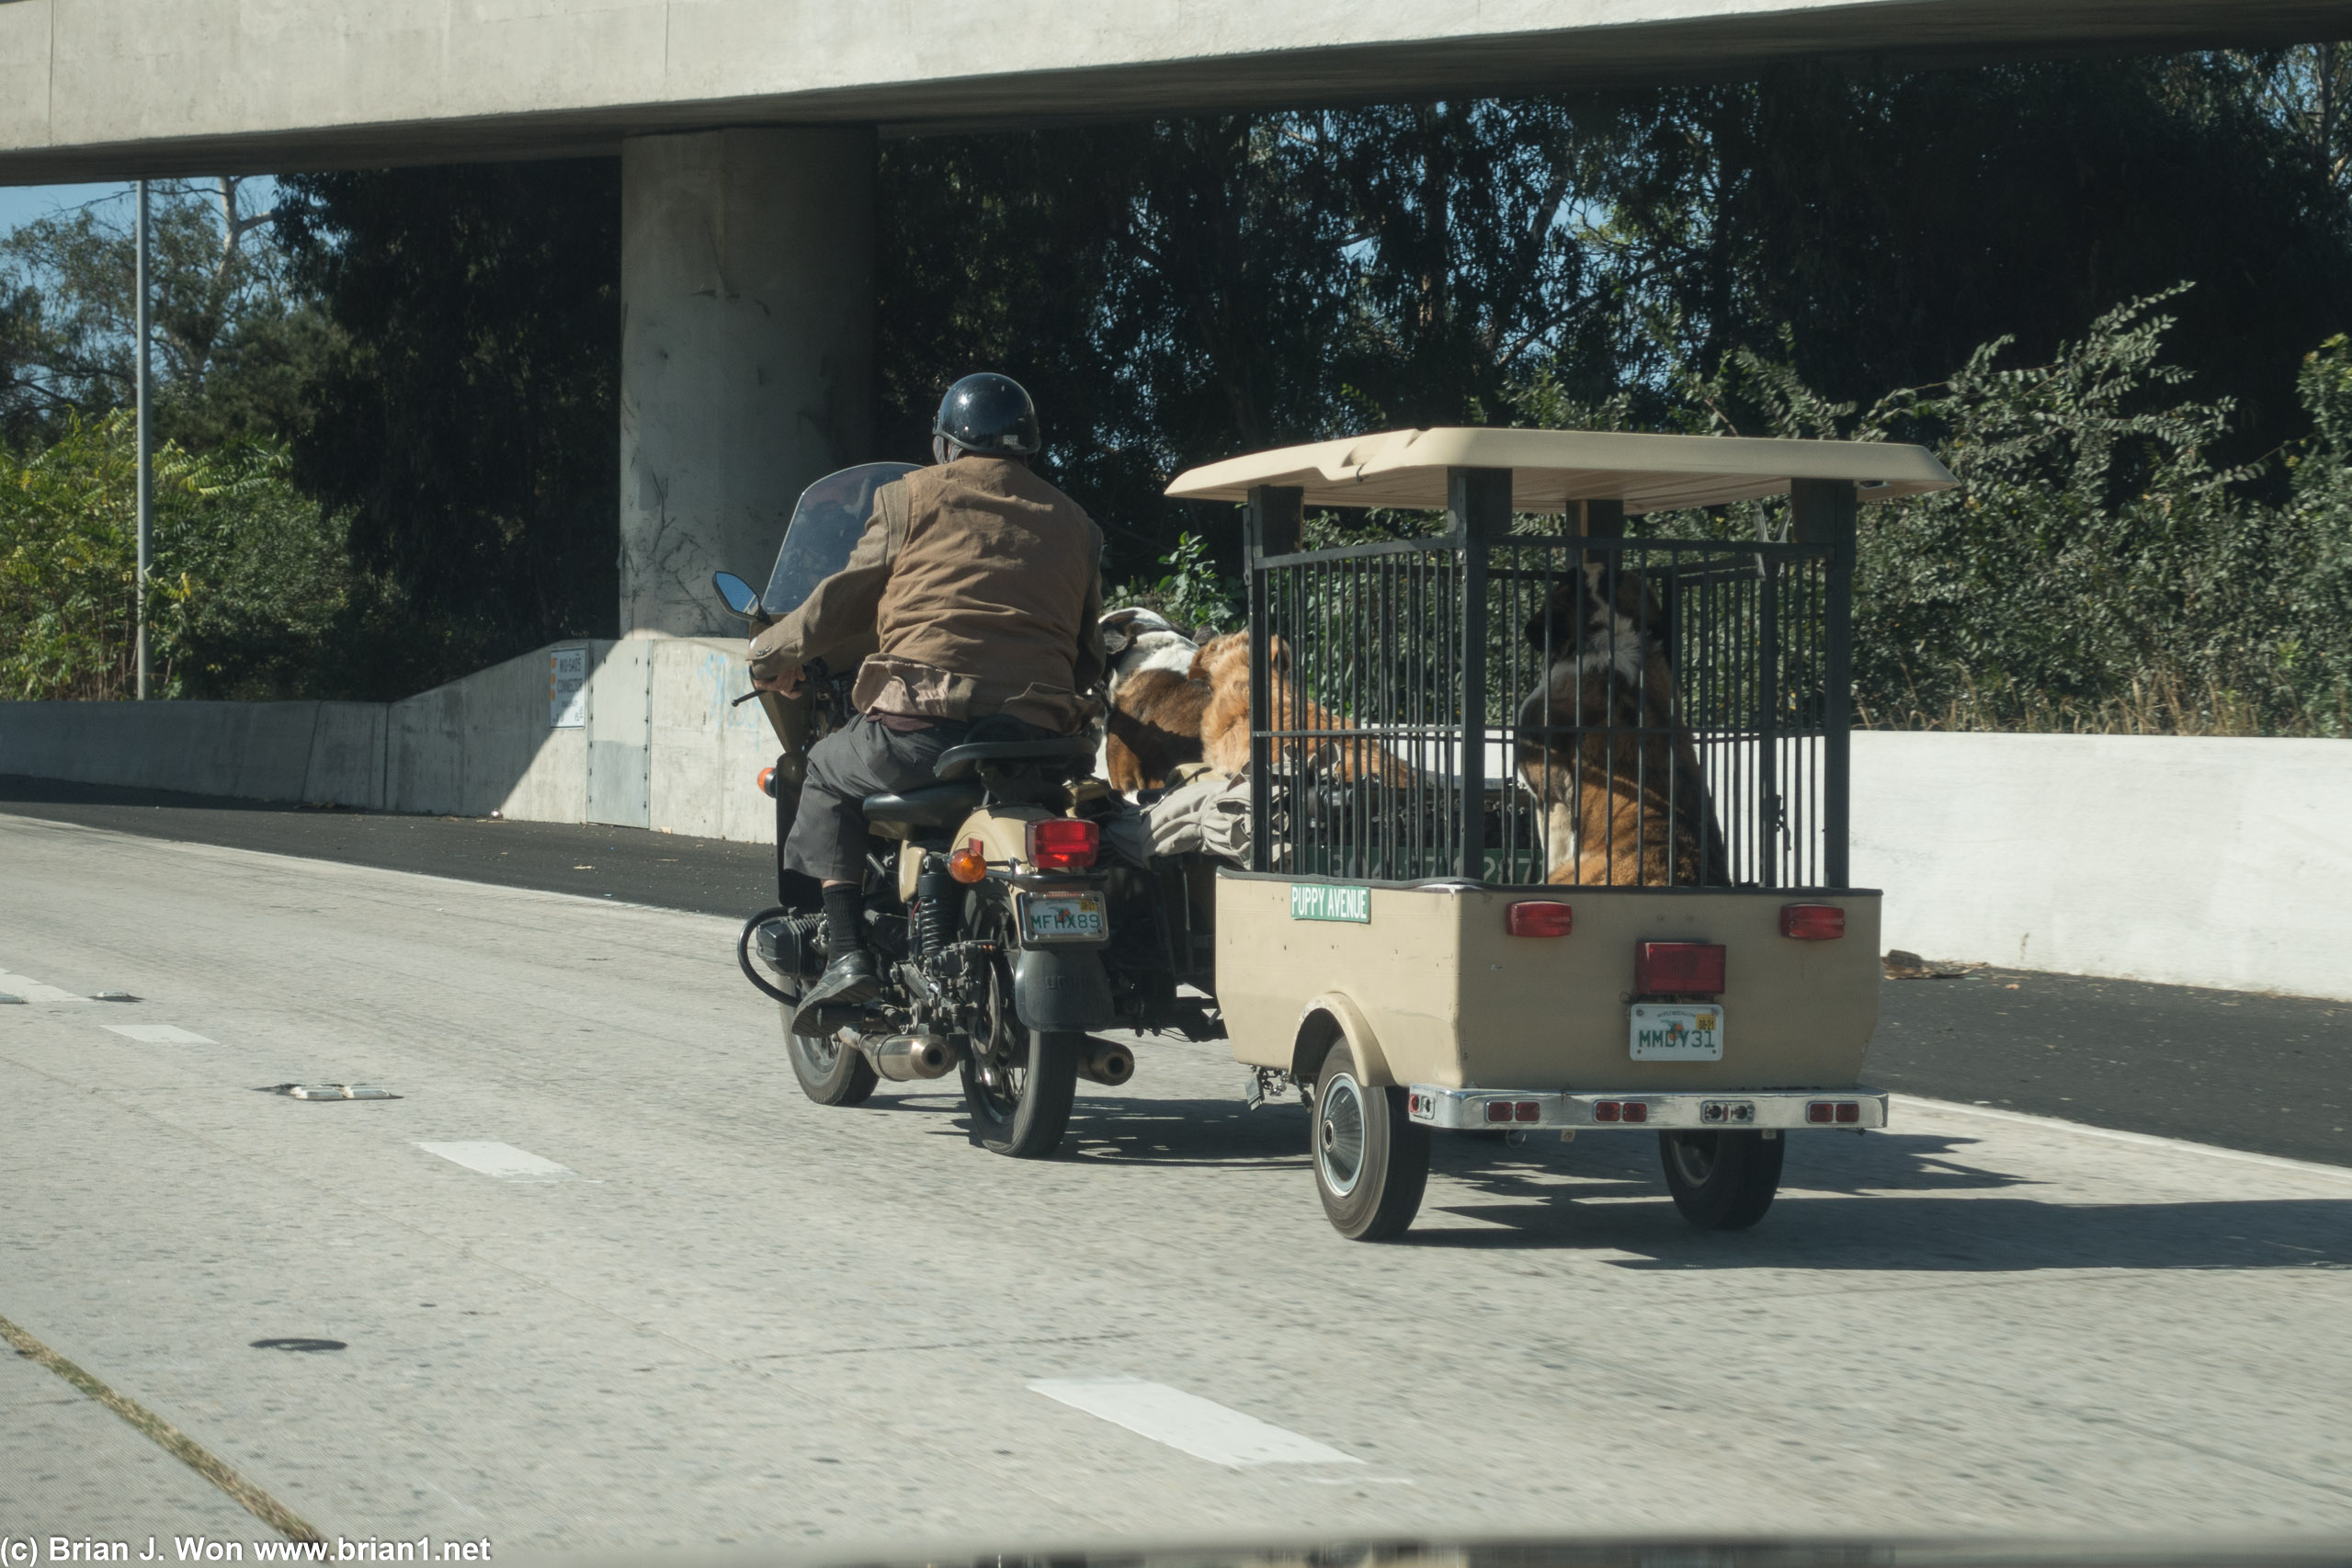 Motorcycle with sidecar and trailer and... 3 big dogs!